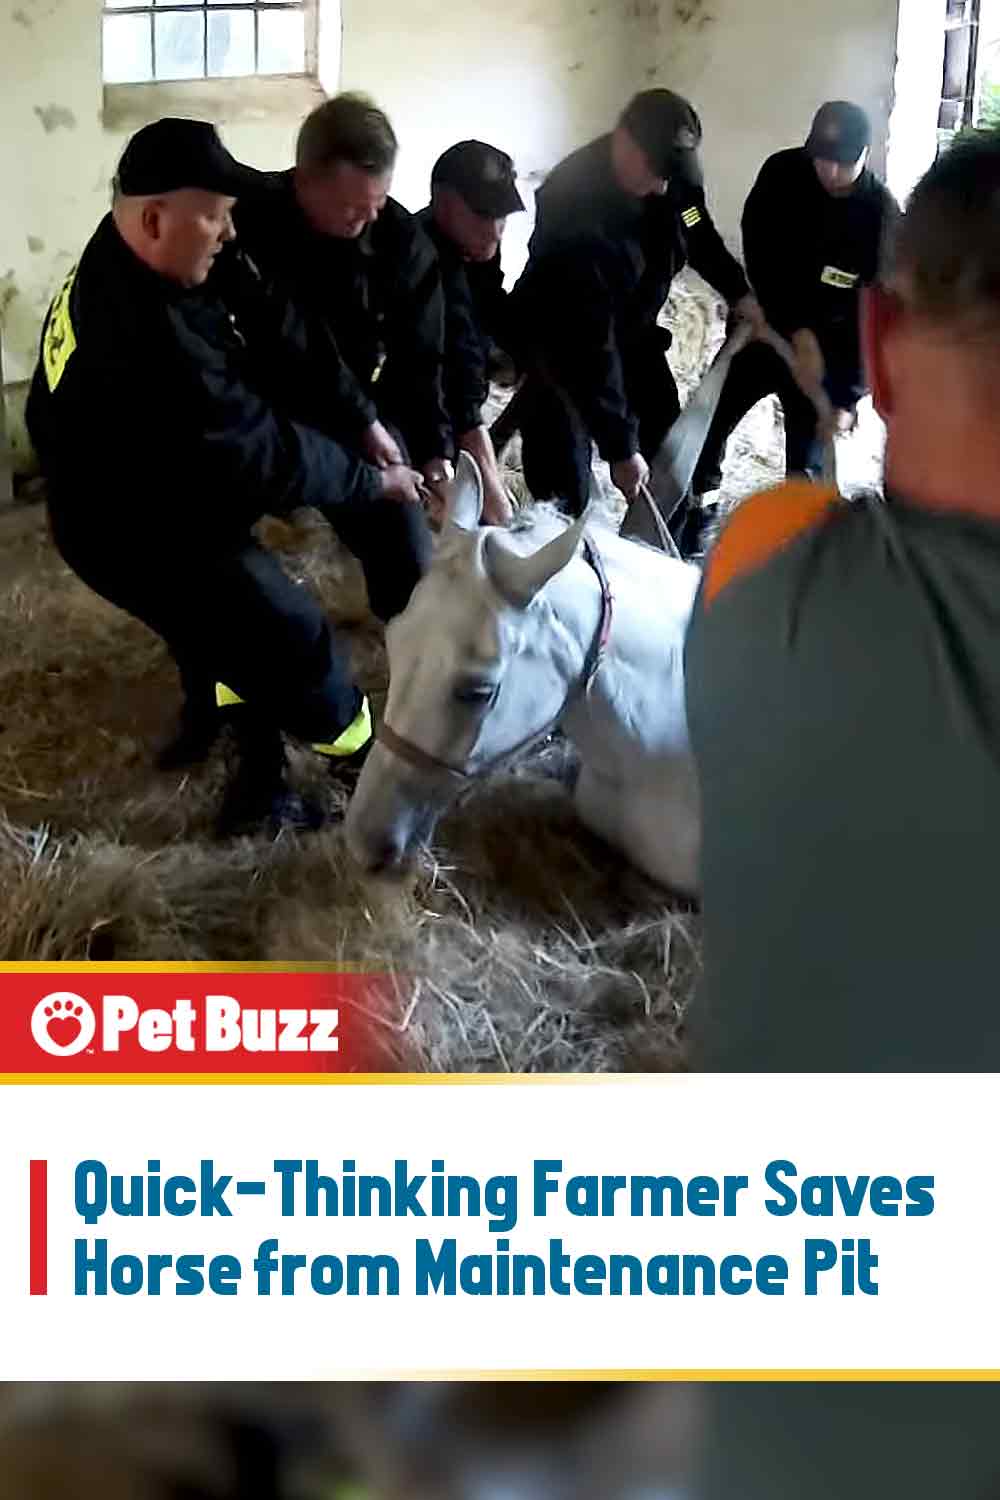 Quick-Thinking Farmer Saves Horse from Maintenance Pit